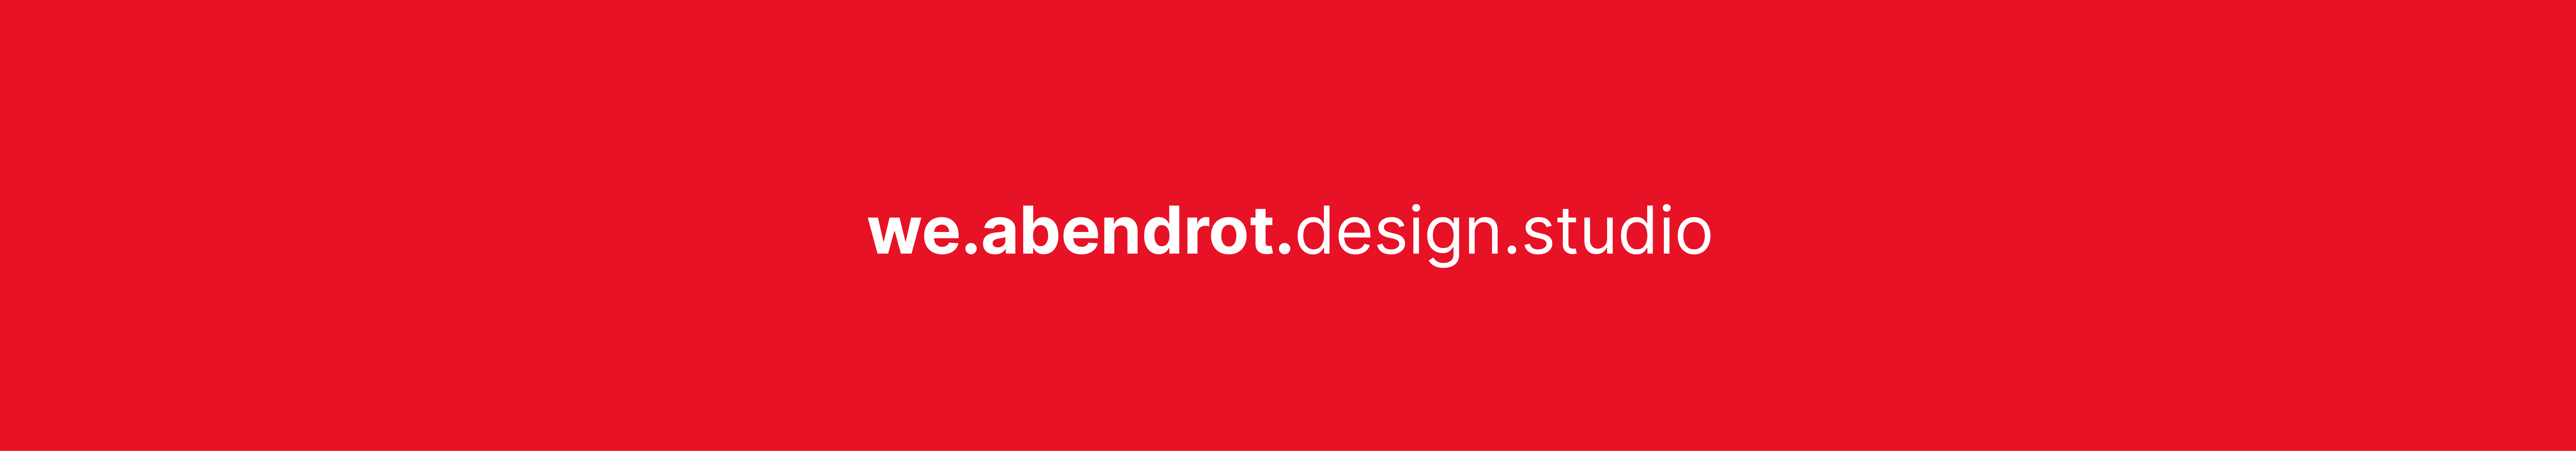 we. abendrot's profile banner